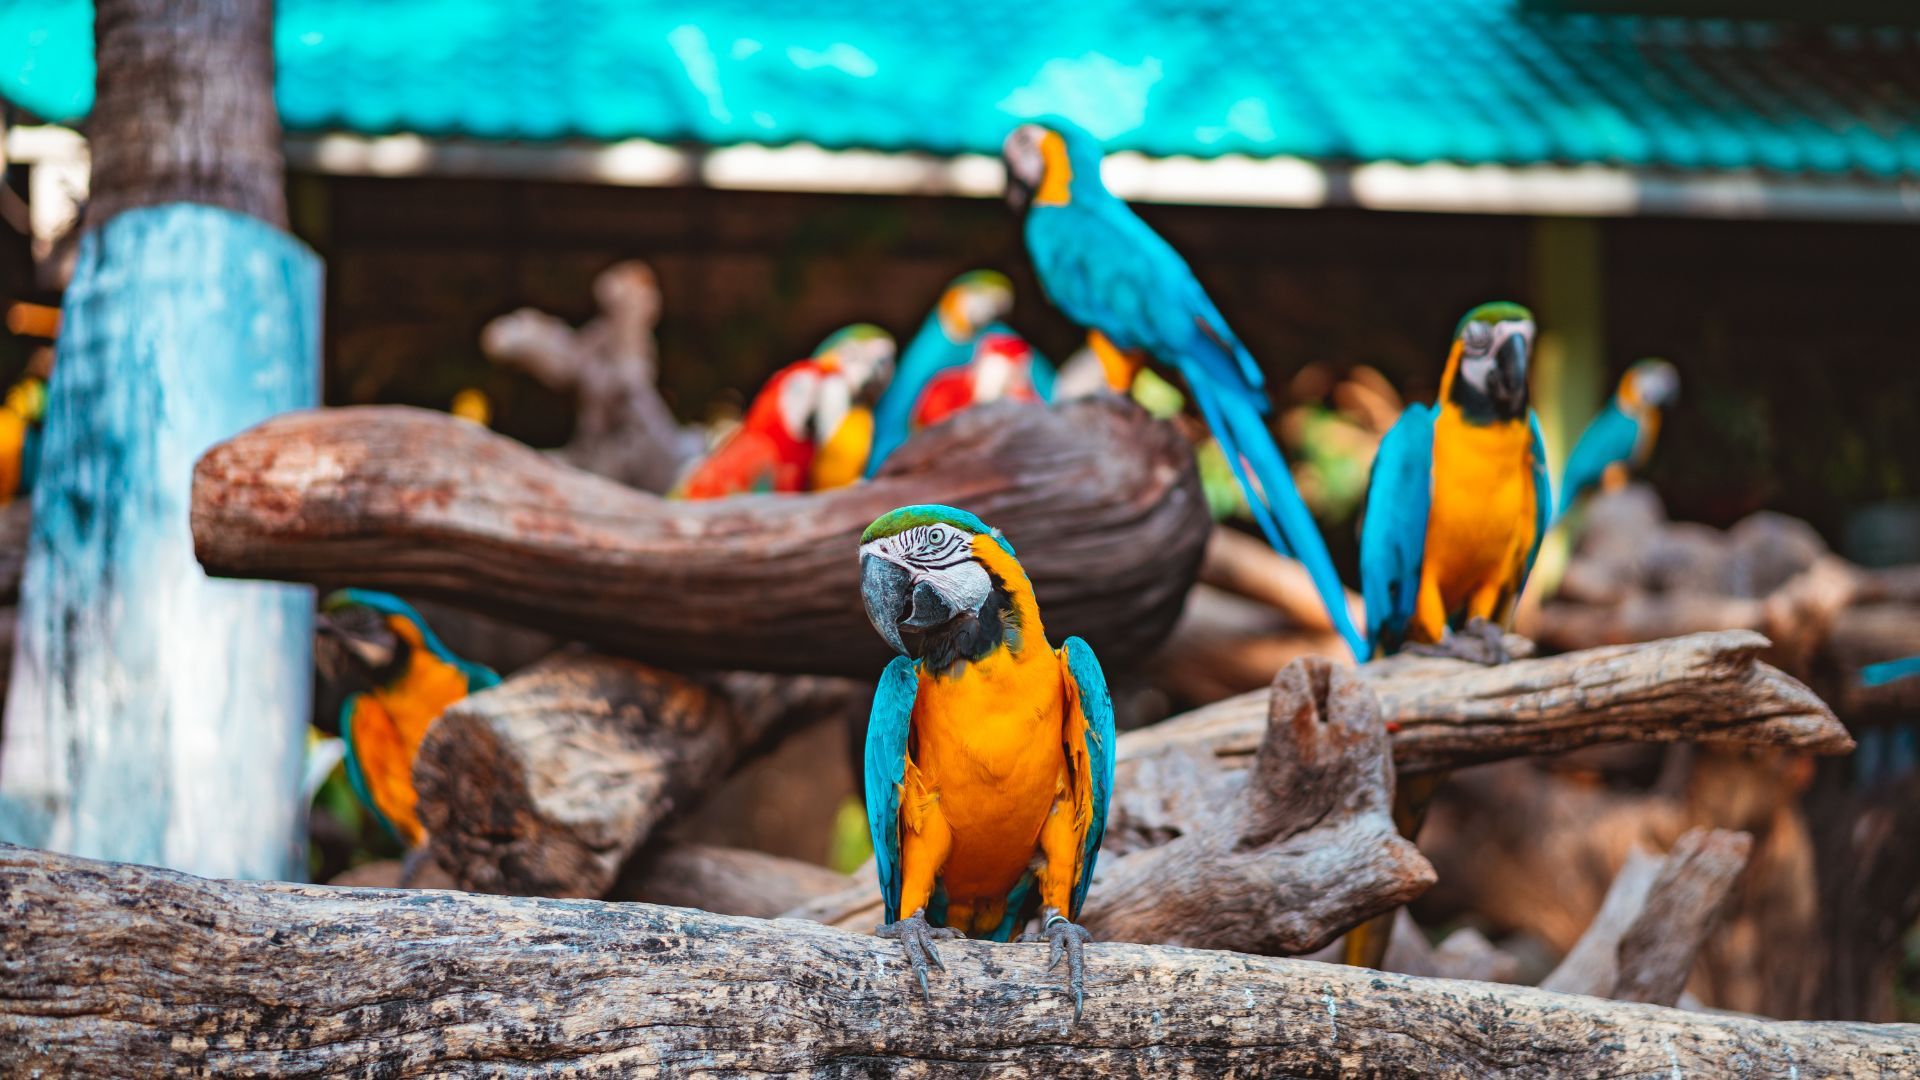 Colourful parrots in safari world - The Best Time To Visit Bangkok